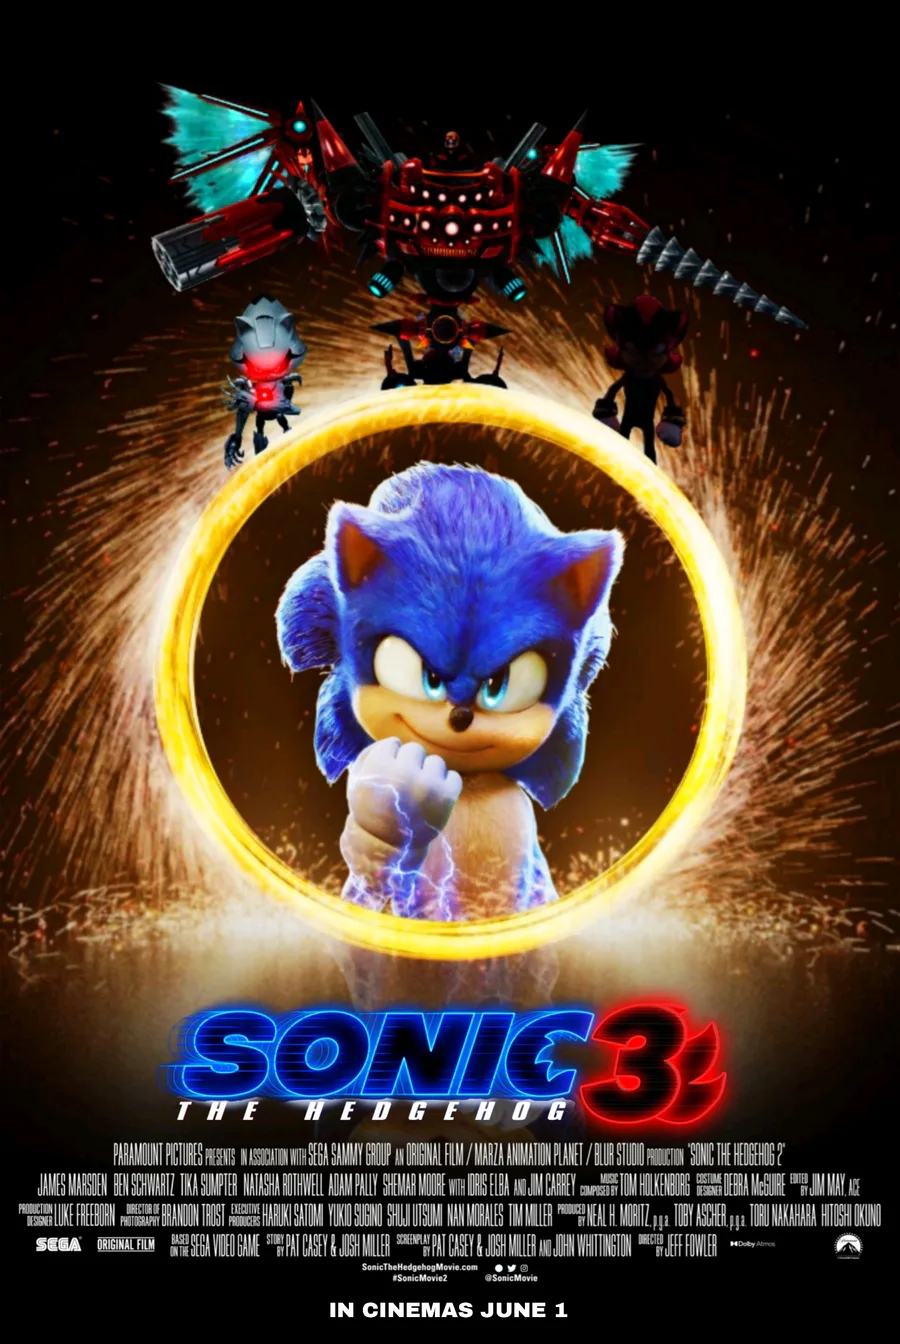 SONIC THE HEDGEHOG 3 (2024) Movie Preview 